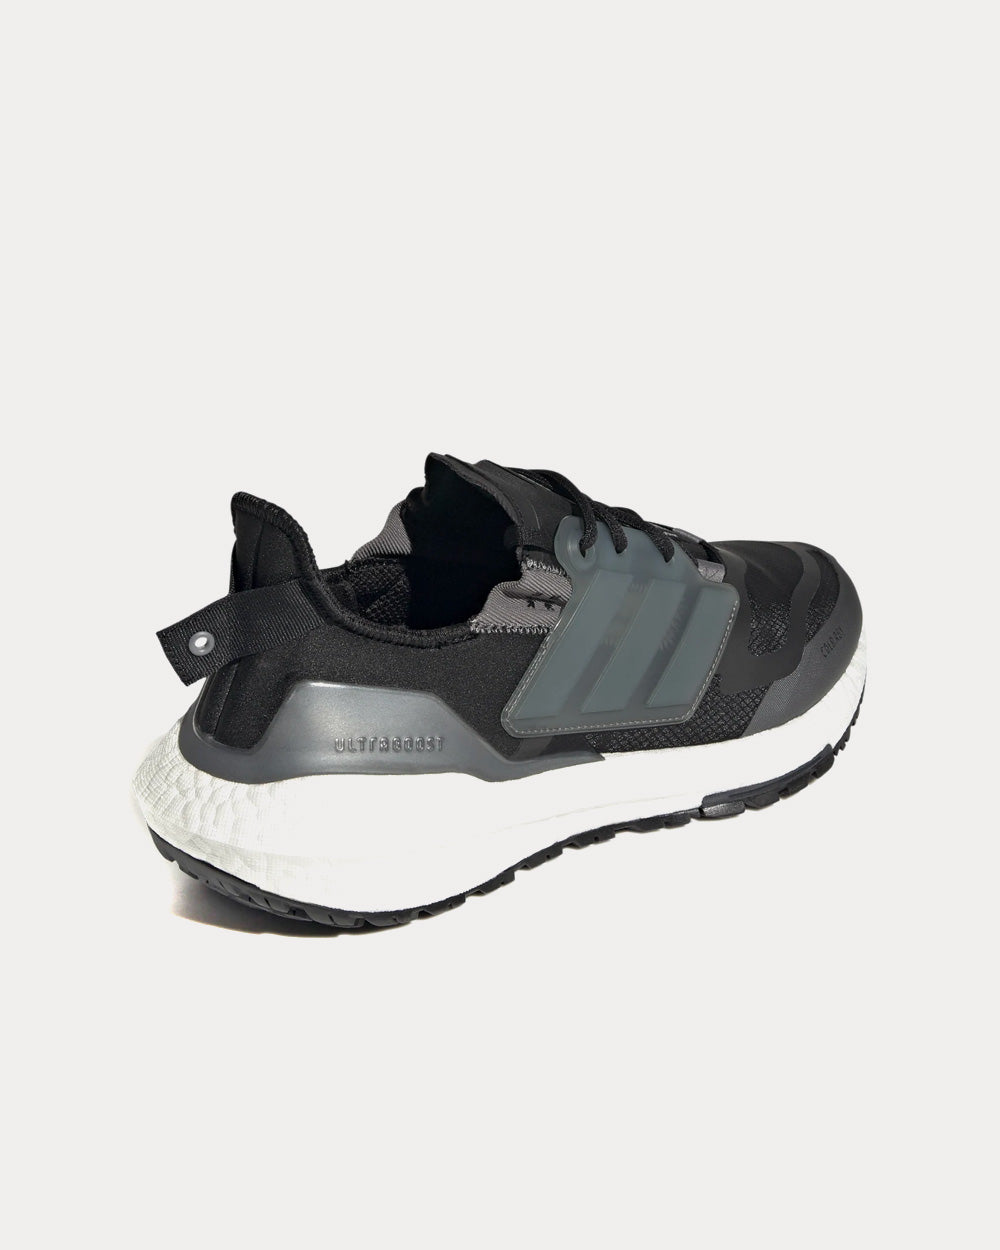 Adidas - Ultraboost 22 Cold.Rdy Core Black / Grey Six / Grey Four Running Shoes